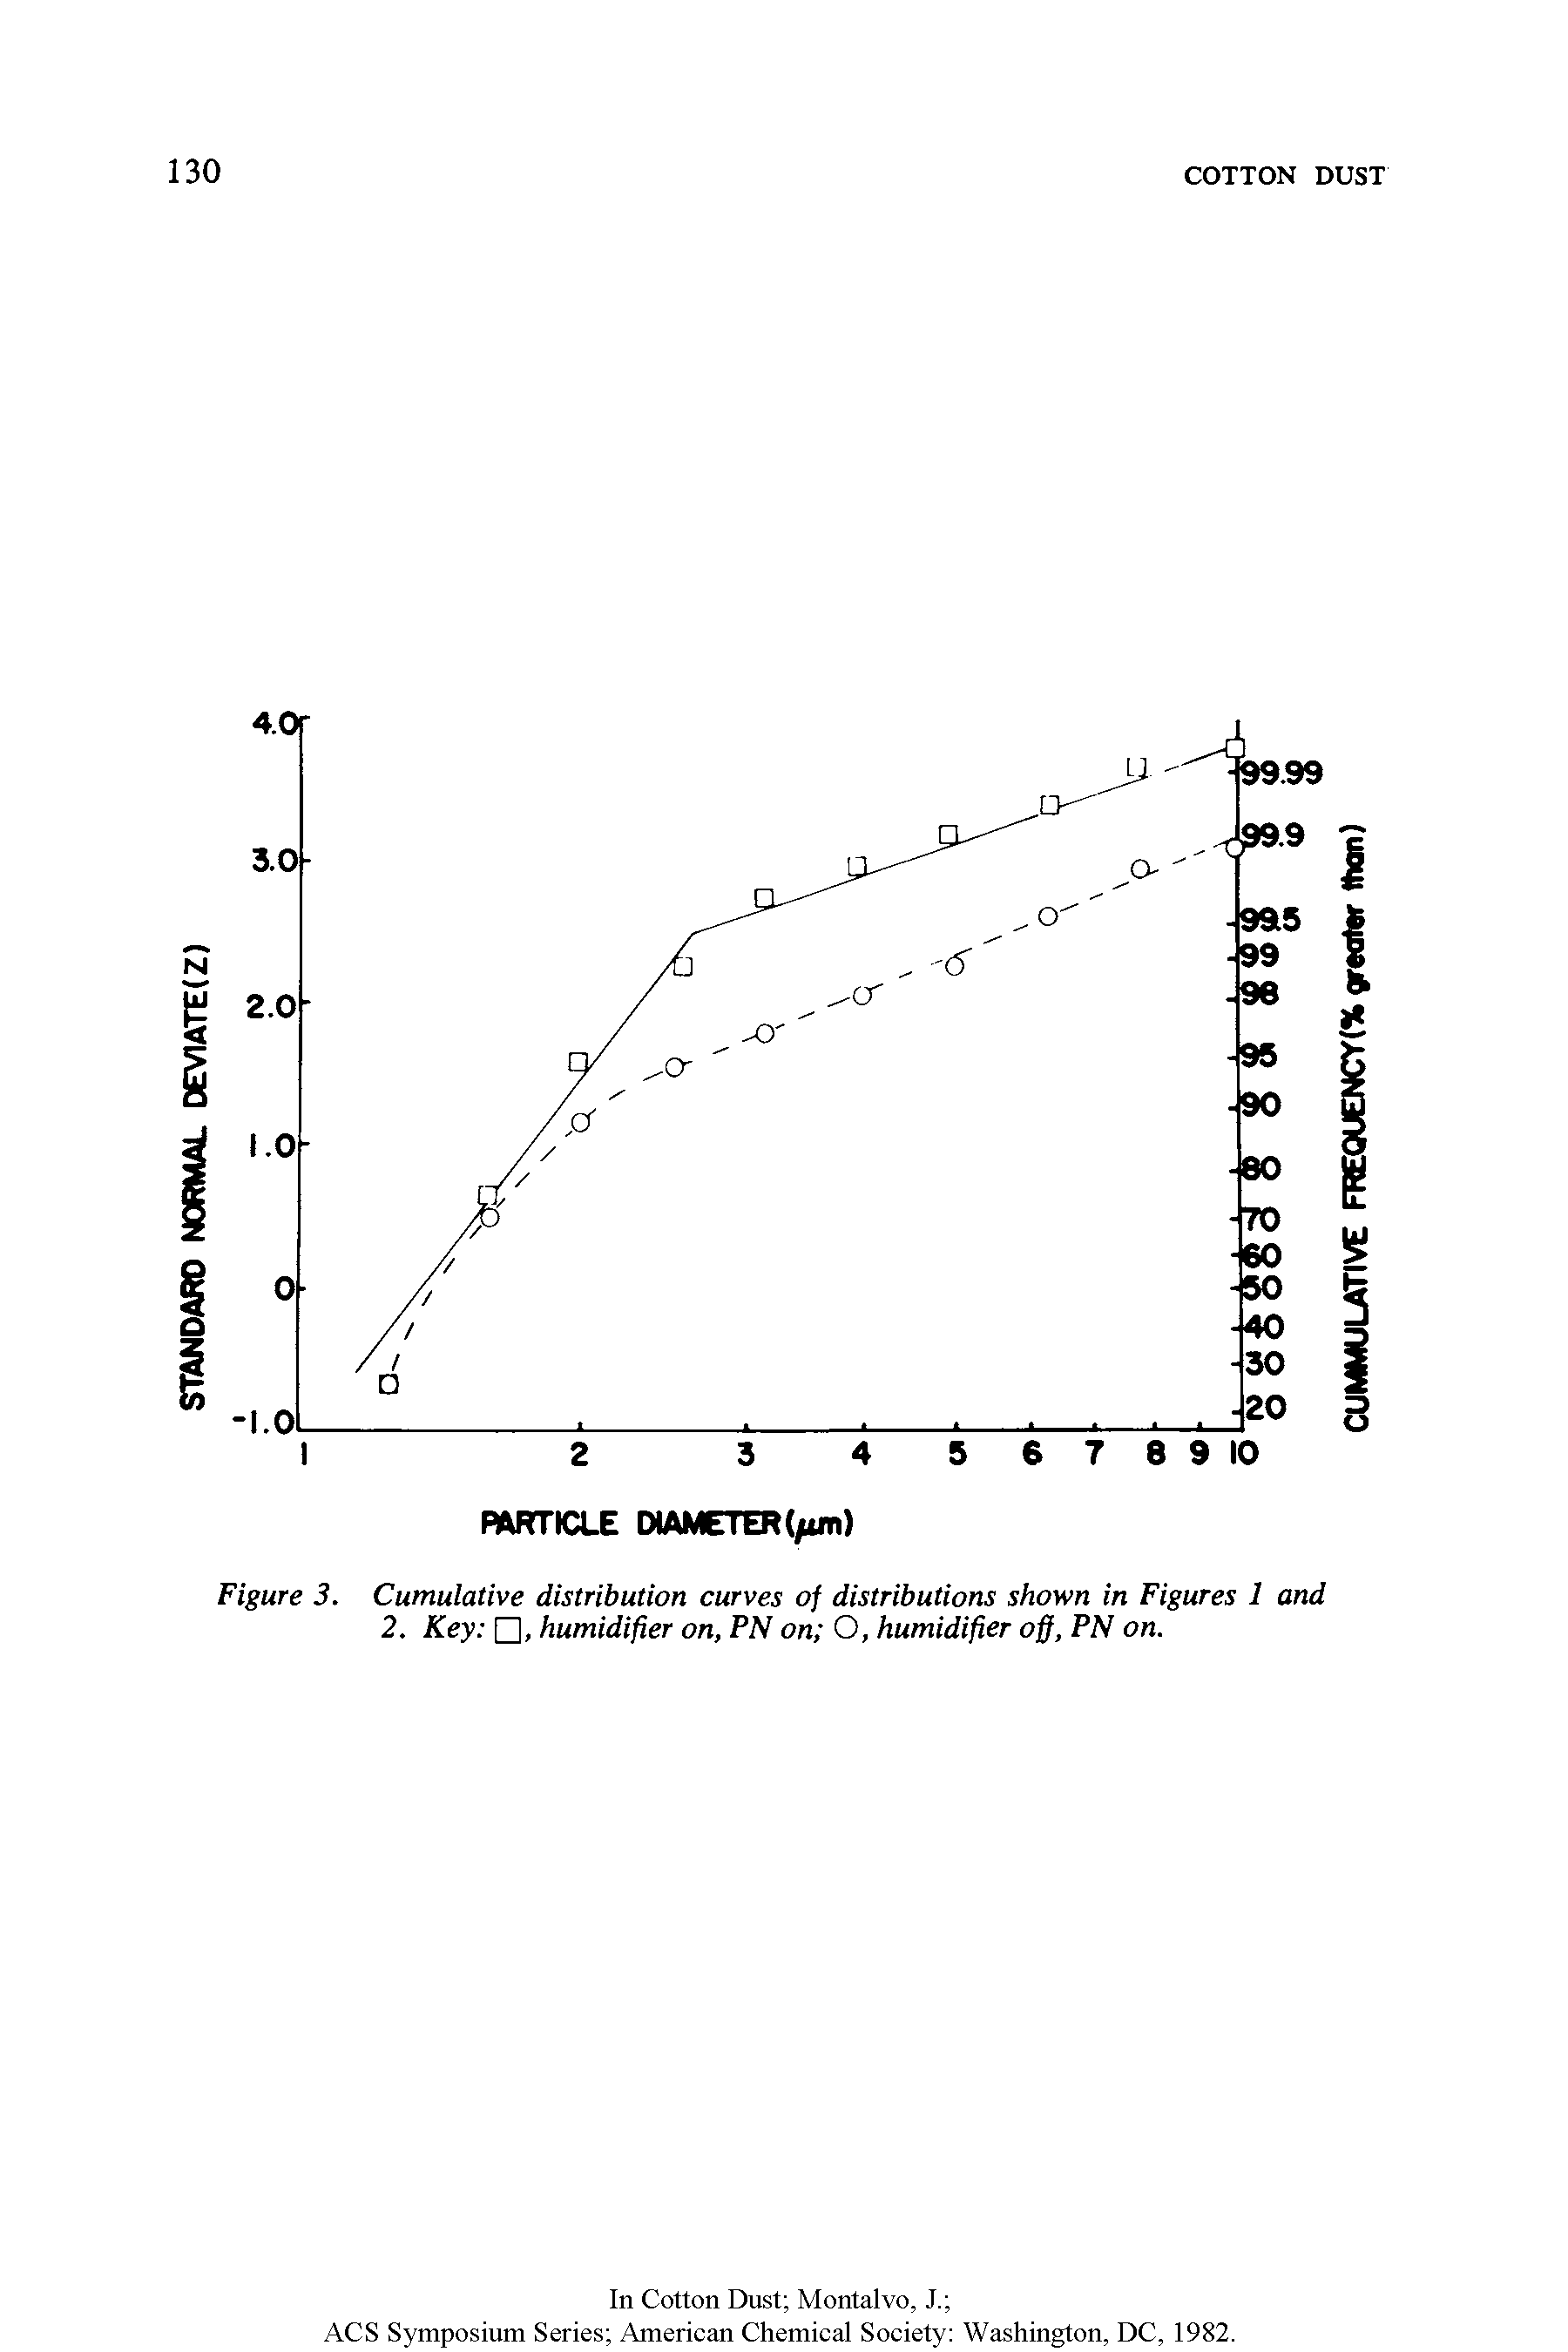 Figure 3. Cumulative distribution curves of distributions shown in Figures 1 and 2. Key , humidifier on, PN on O, humidifier off, PN on.